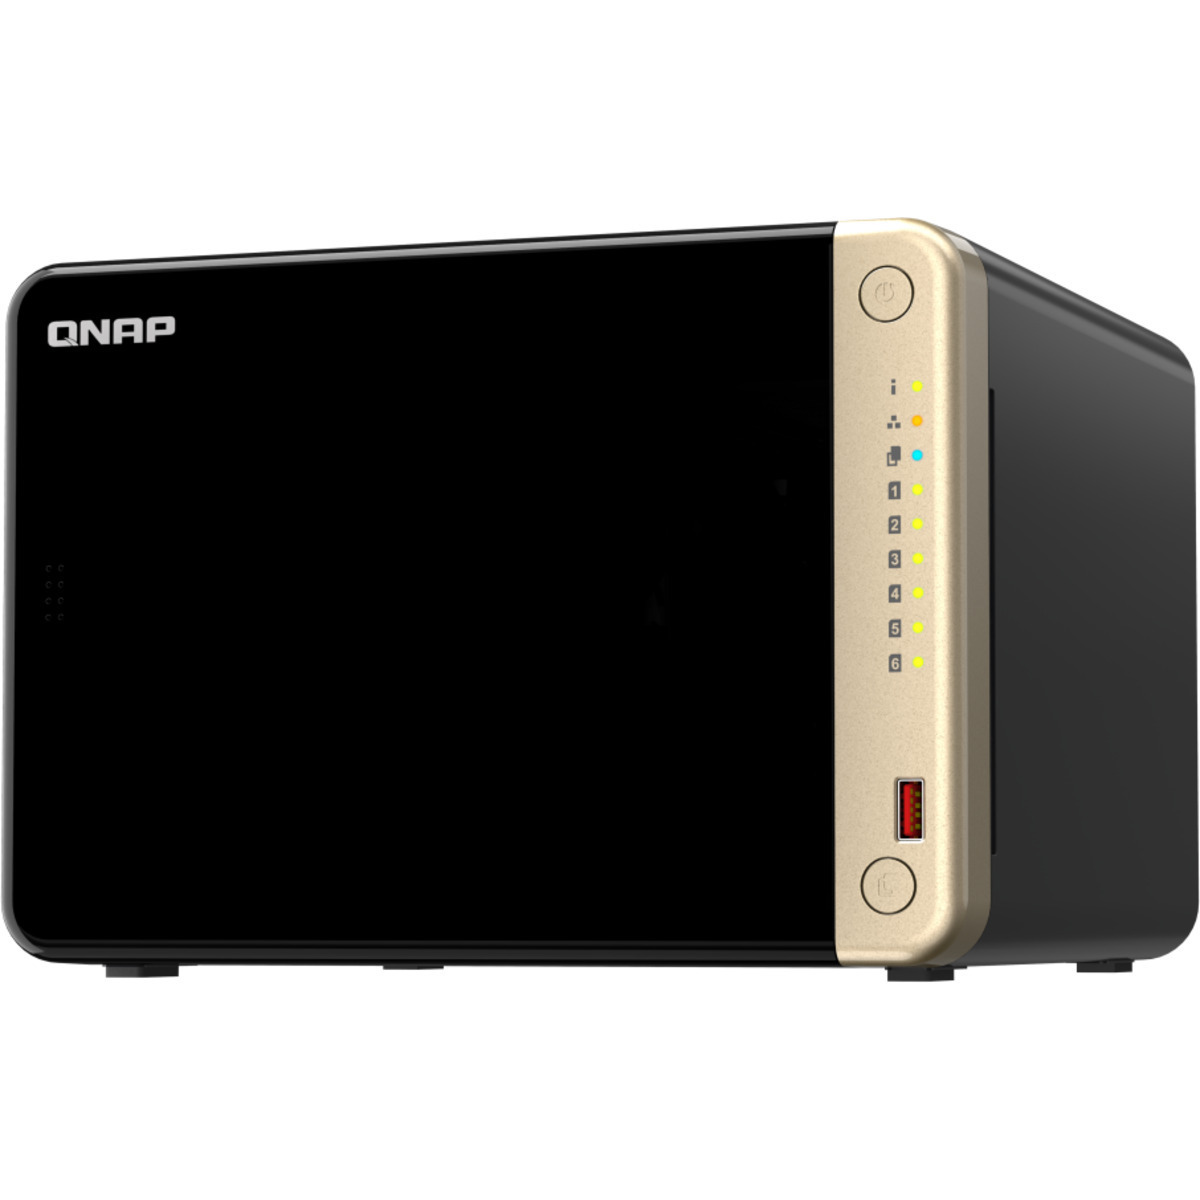 QNAP TS-664 100tb 6-Bay Desktop Multimedia / Power User / Business NAS - Network Attached Storage Device 5x20tb Seagate EXOS X20 ST20000NM007D 3.5 7200rpm SATA 6Gb/s HDD ENTERPRISE Class Drives Installed - Burn-In Tested TS-664